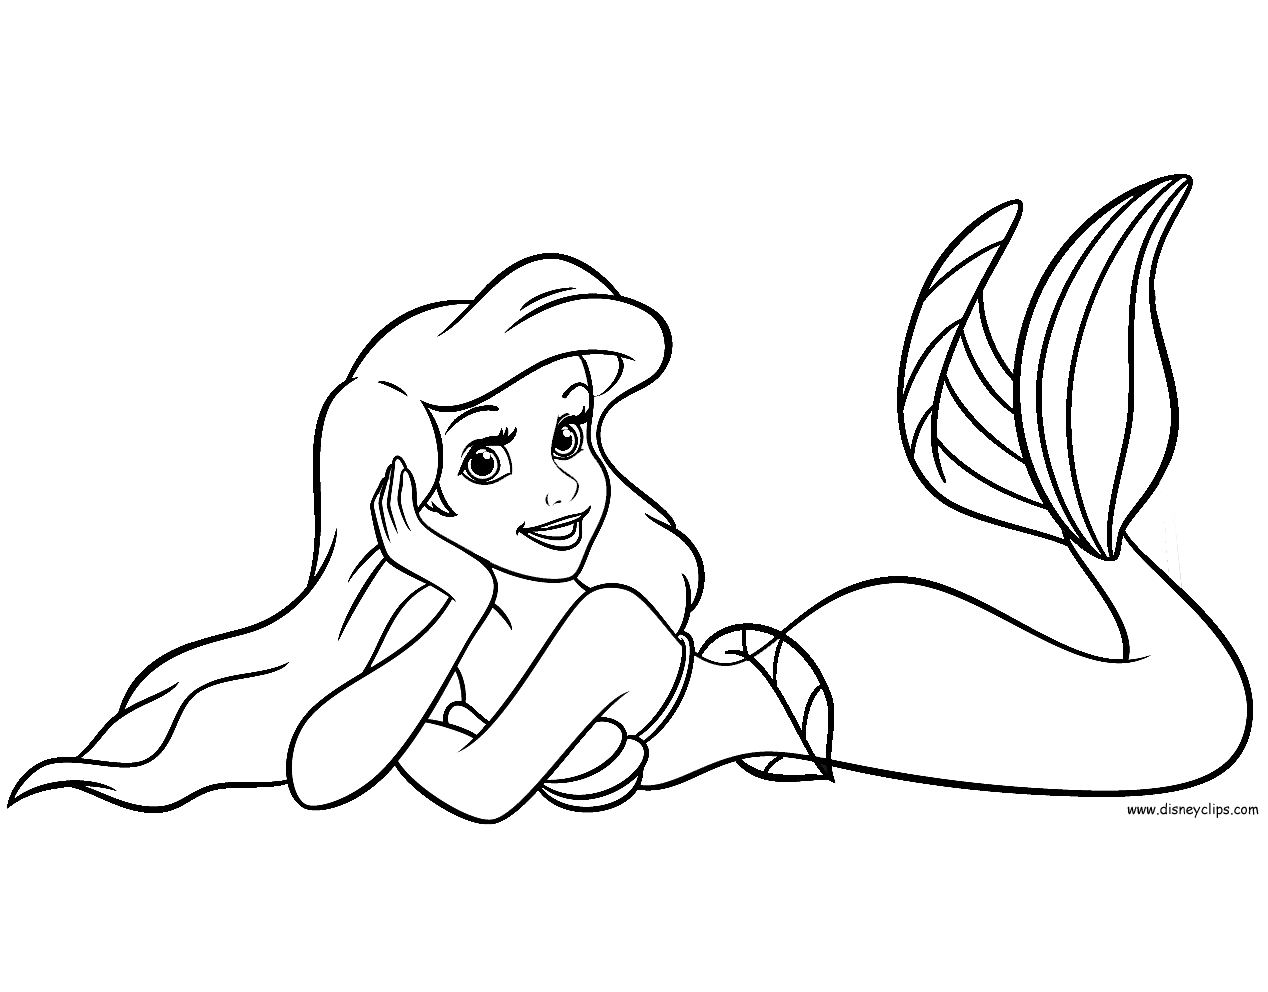 The Little Mermaid Coloring Pages (4)